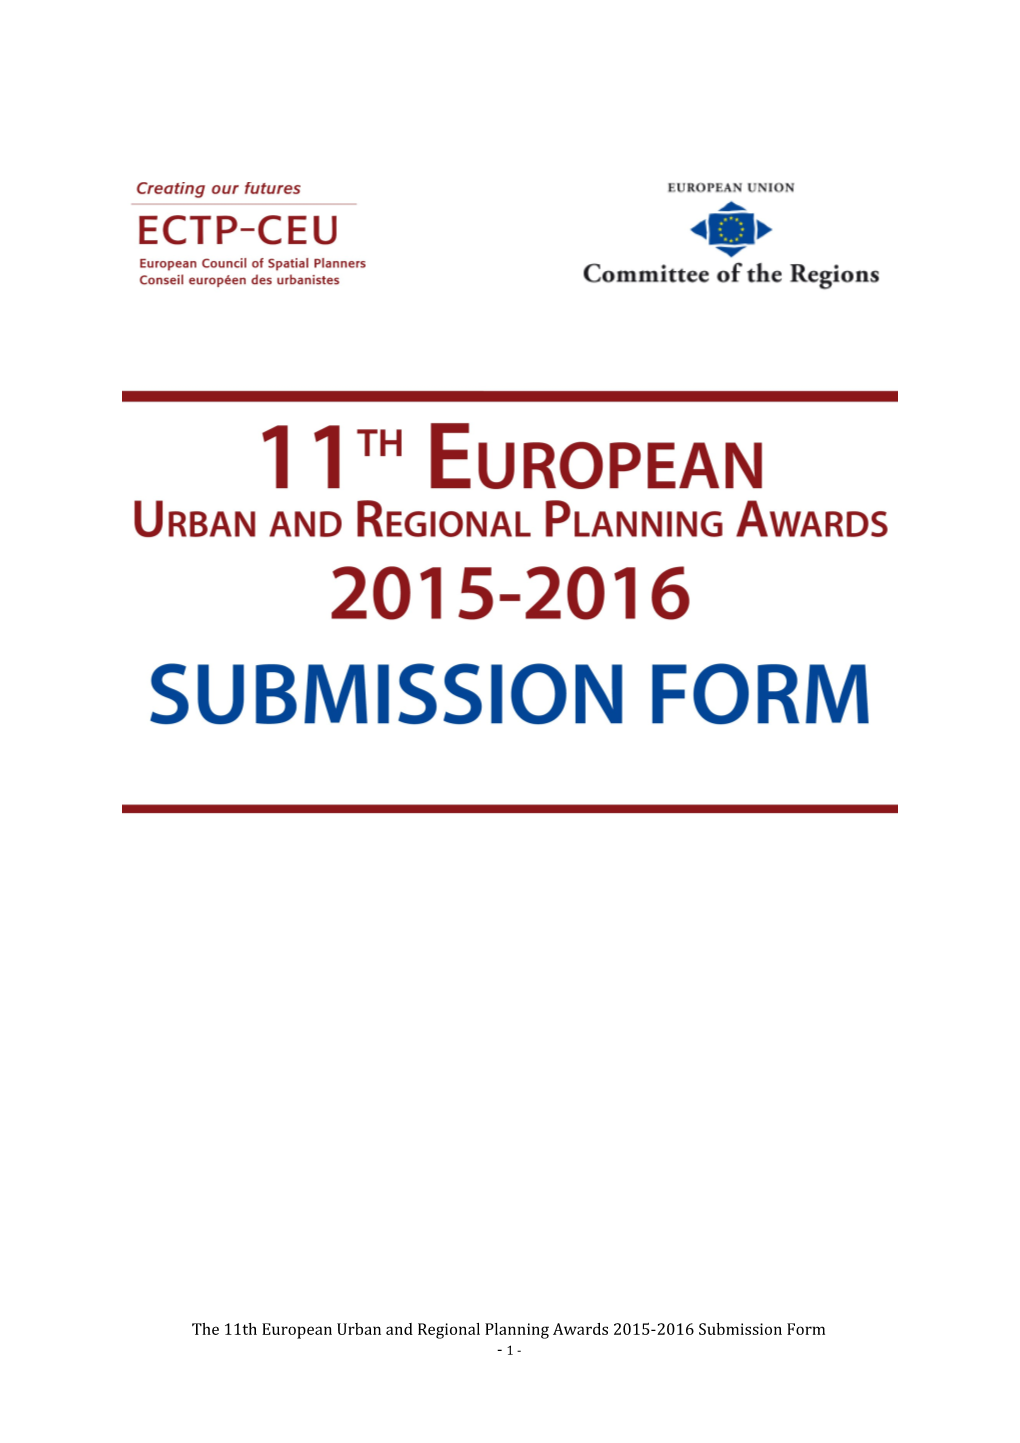 The 11Th European Urban and Regional Planning Awards 2015-2016 Submission Form